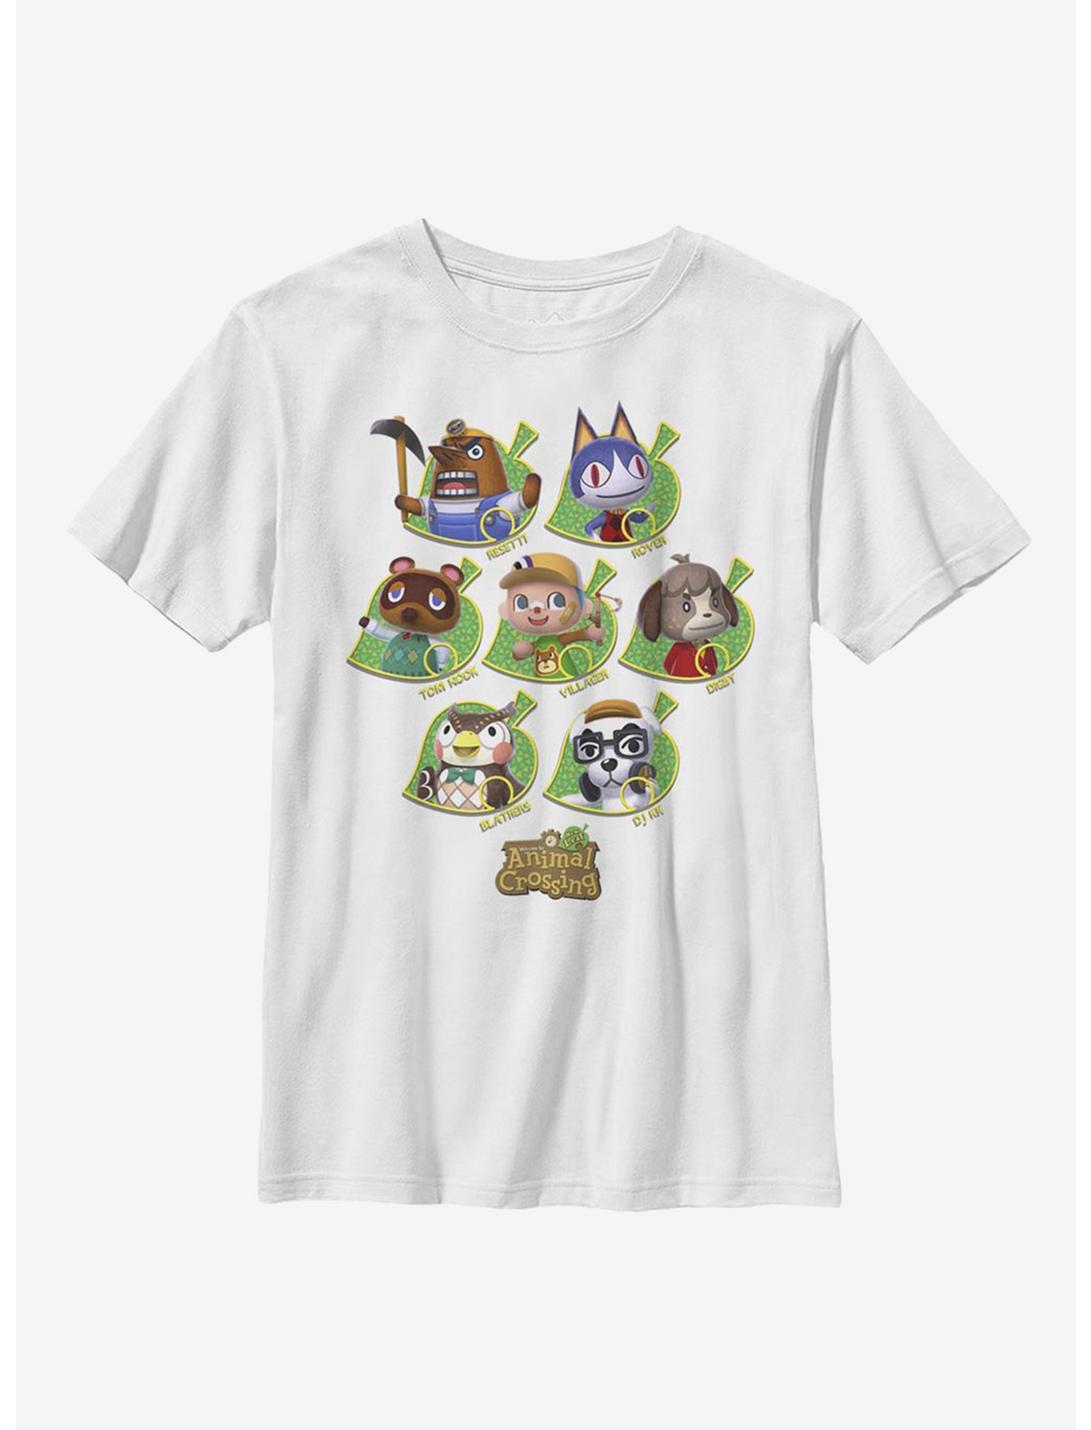 Animal Crossing New Leaves Youth T-Shirt, WHITE, hi-res